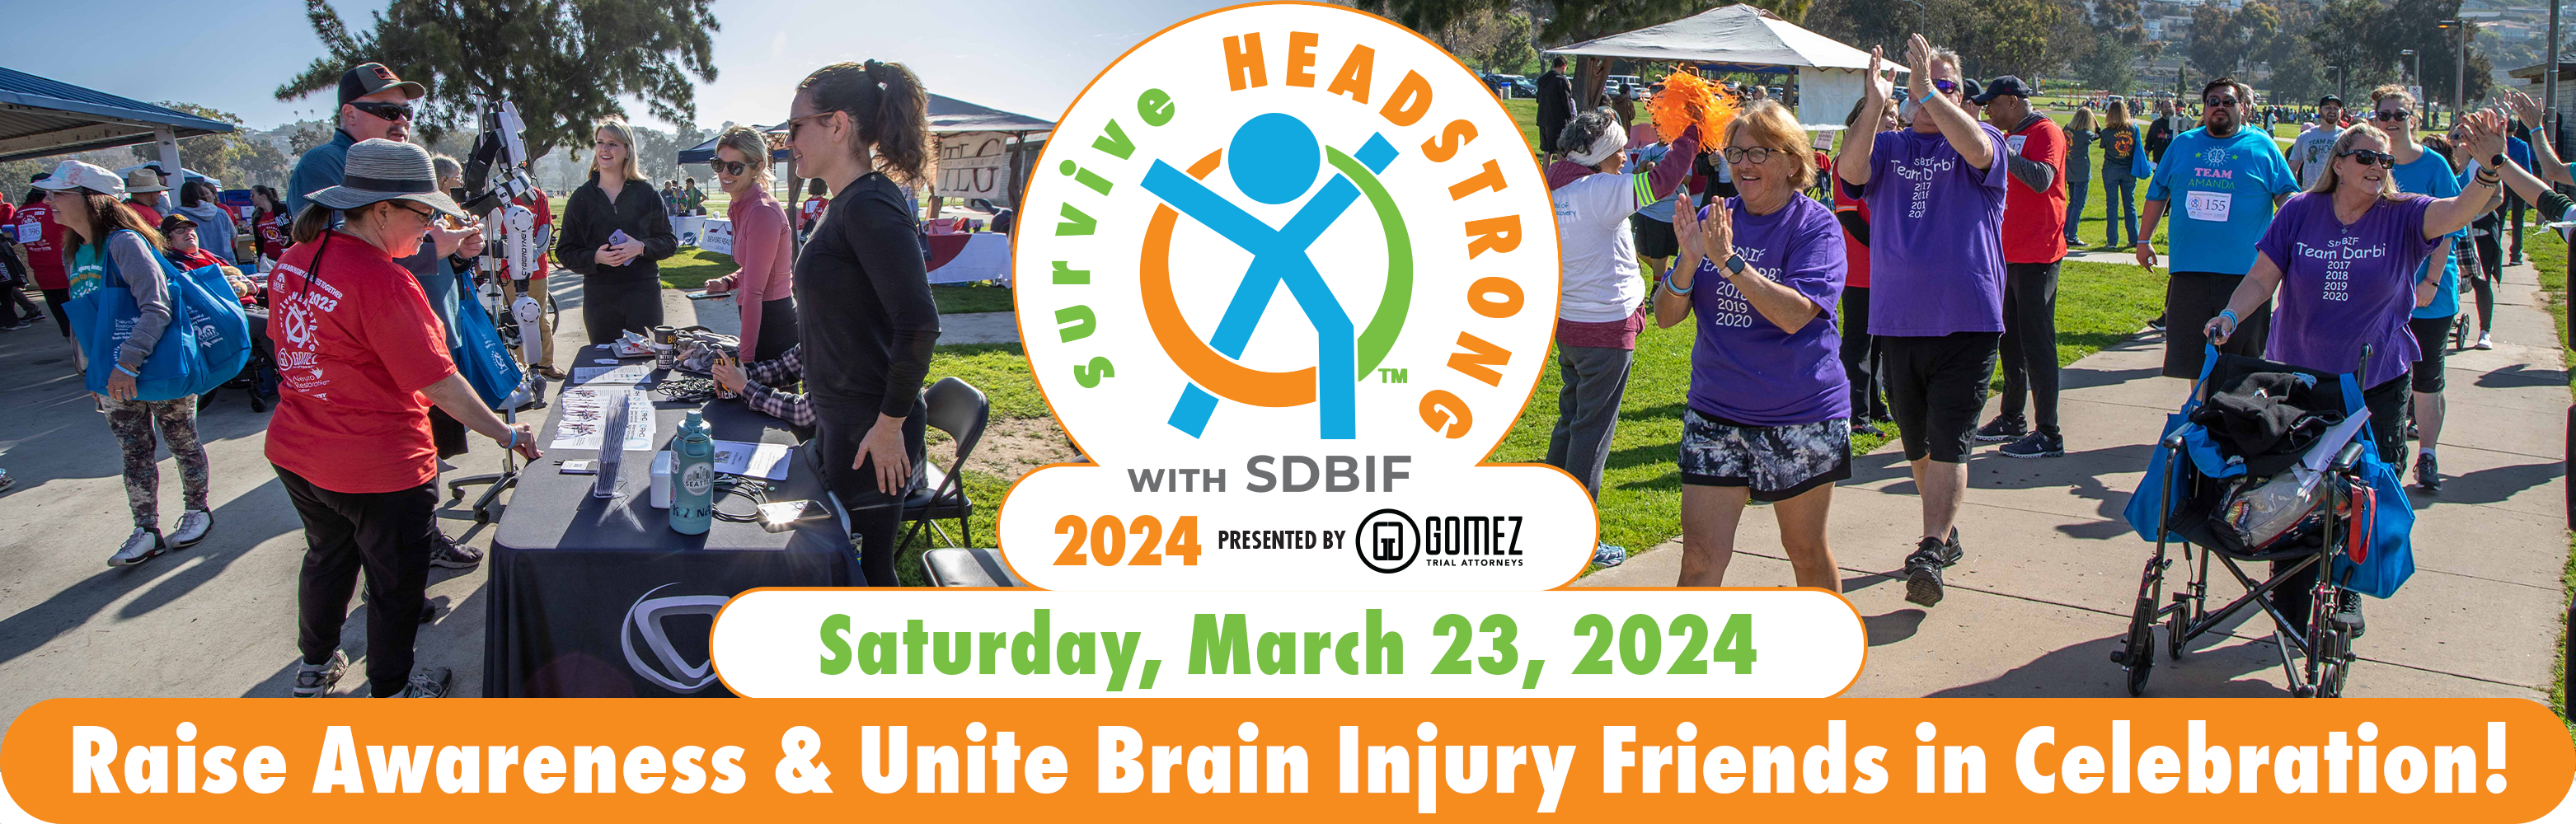 2024 surviveHEADSTRONG with SDBIF presented by Gomez Trial Attorneys event page banner